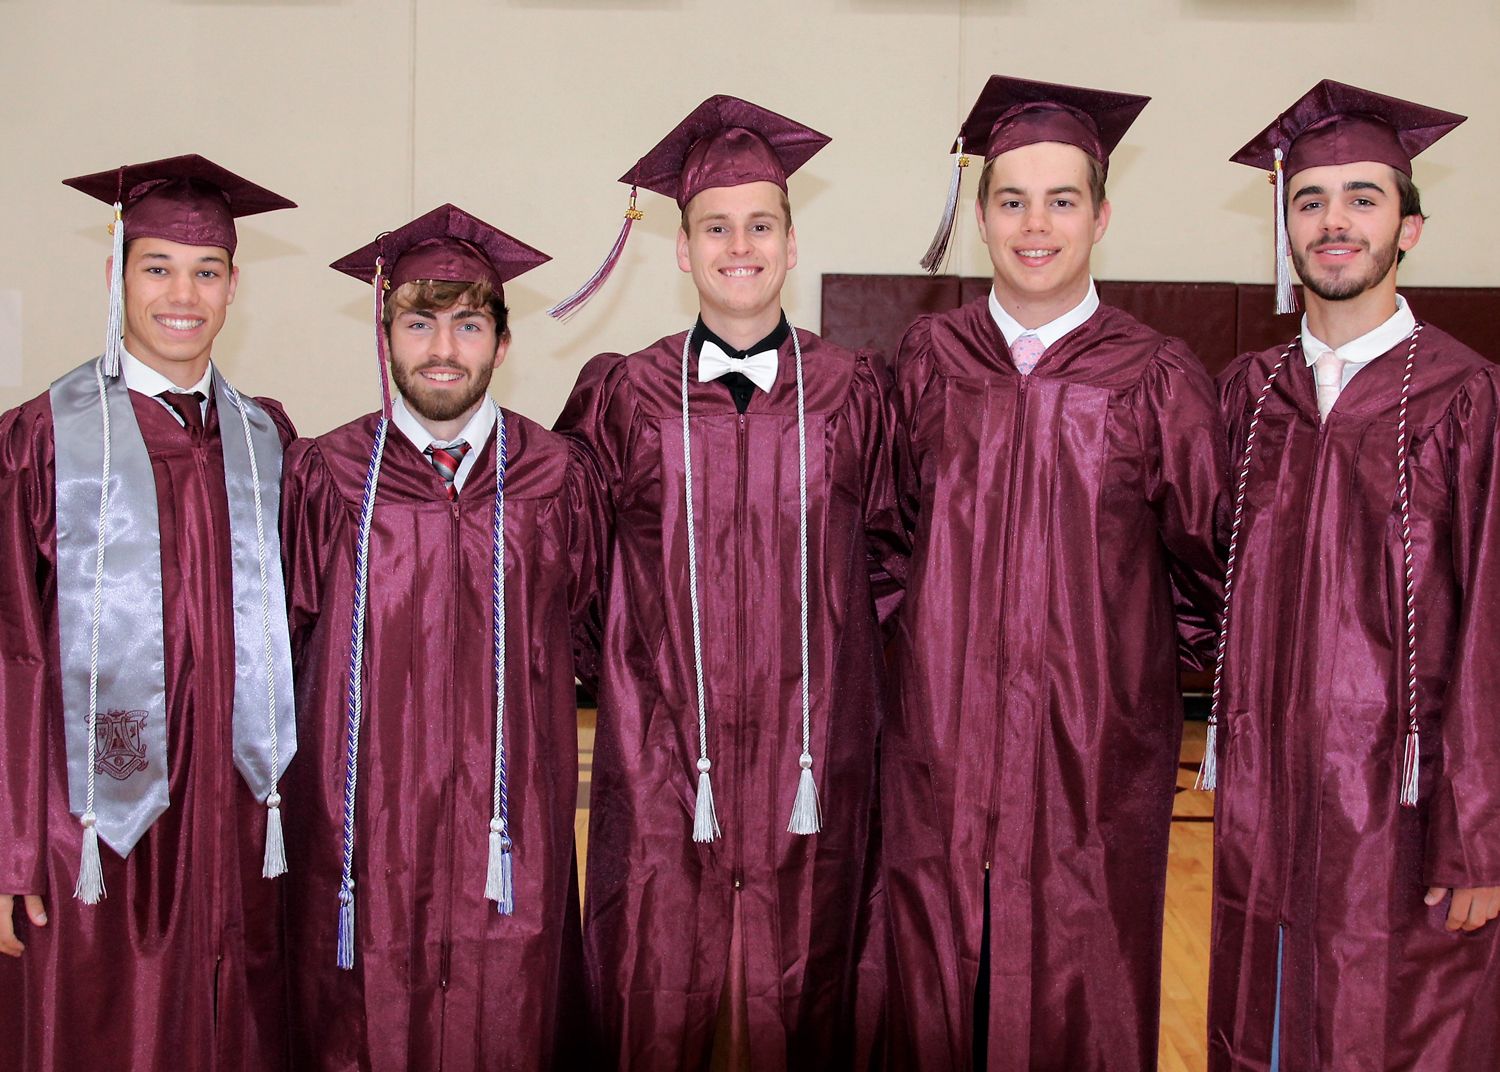 Five guys in caps and gowns, smiling and looking at the camera